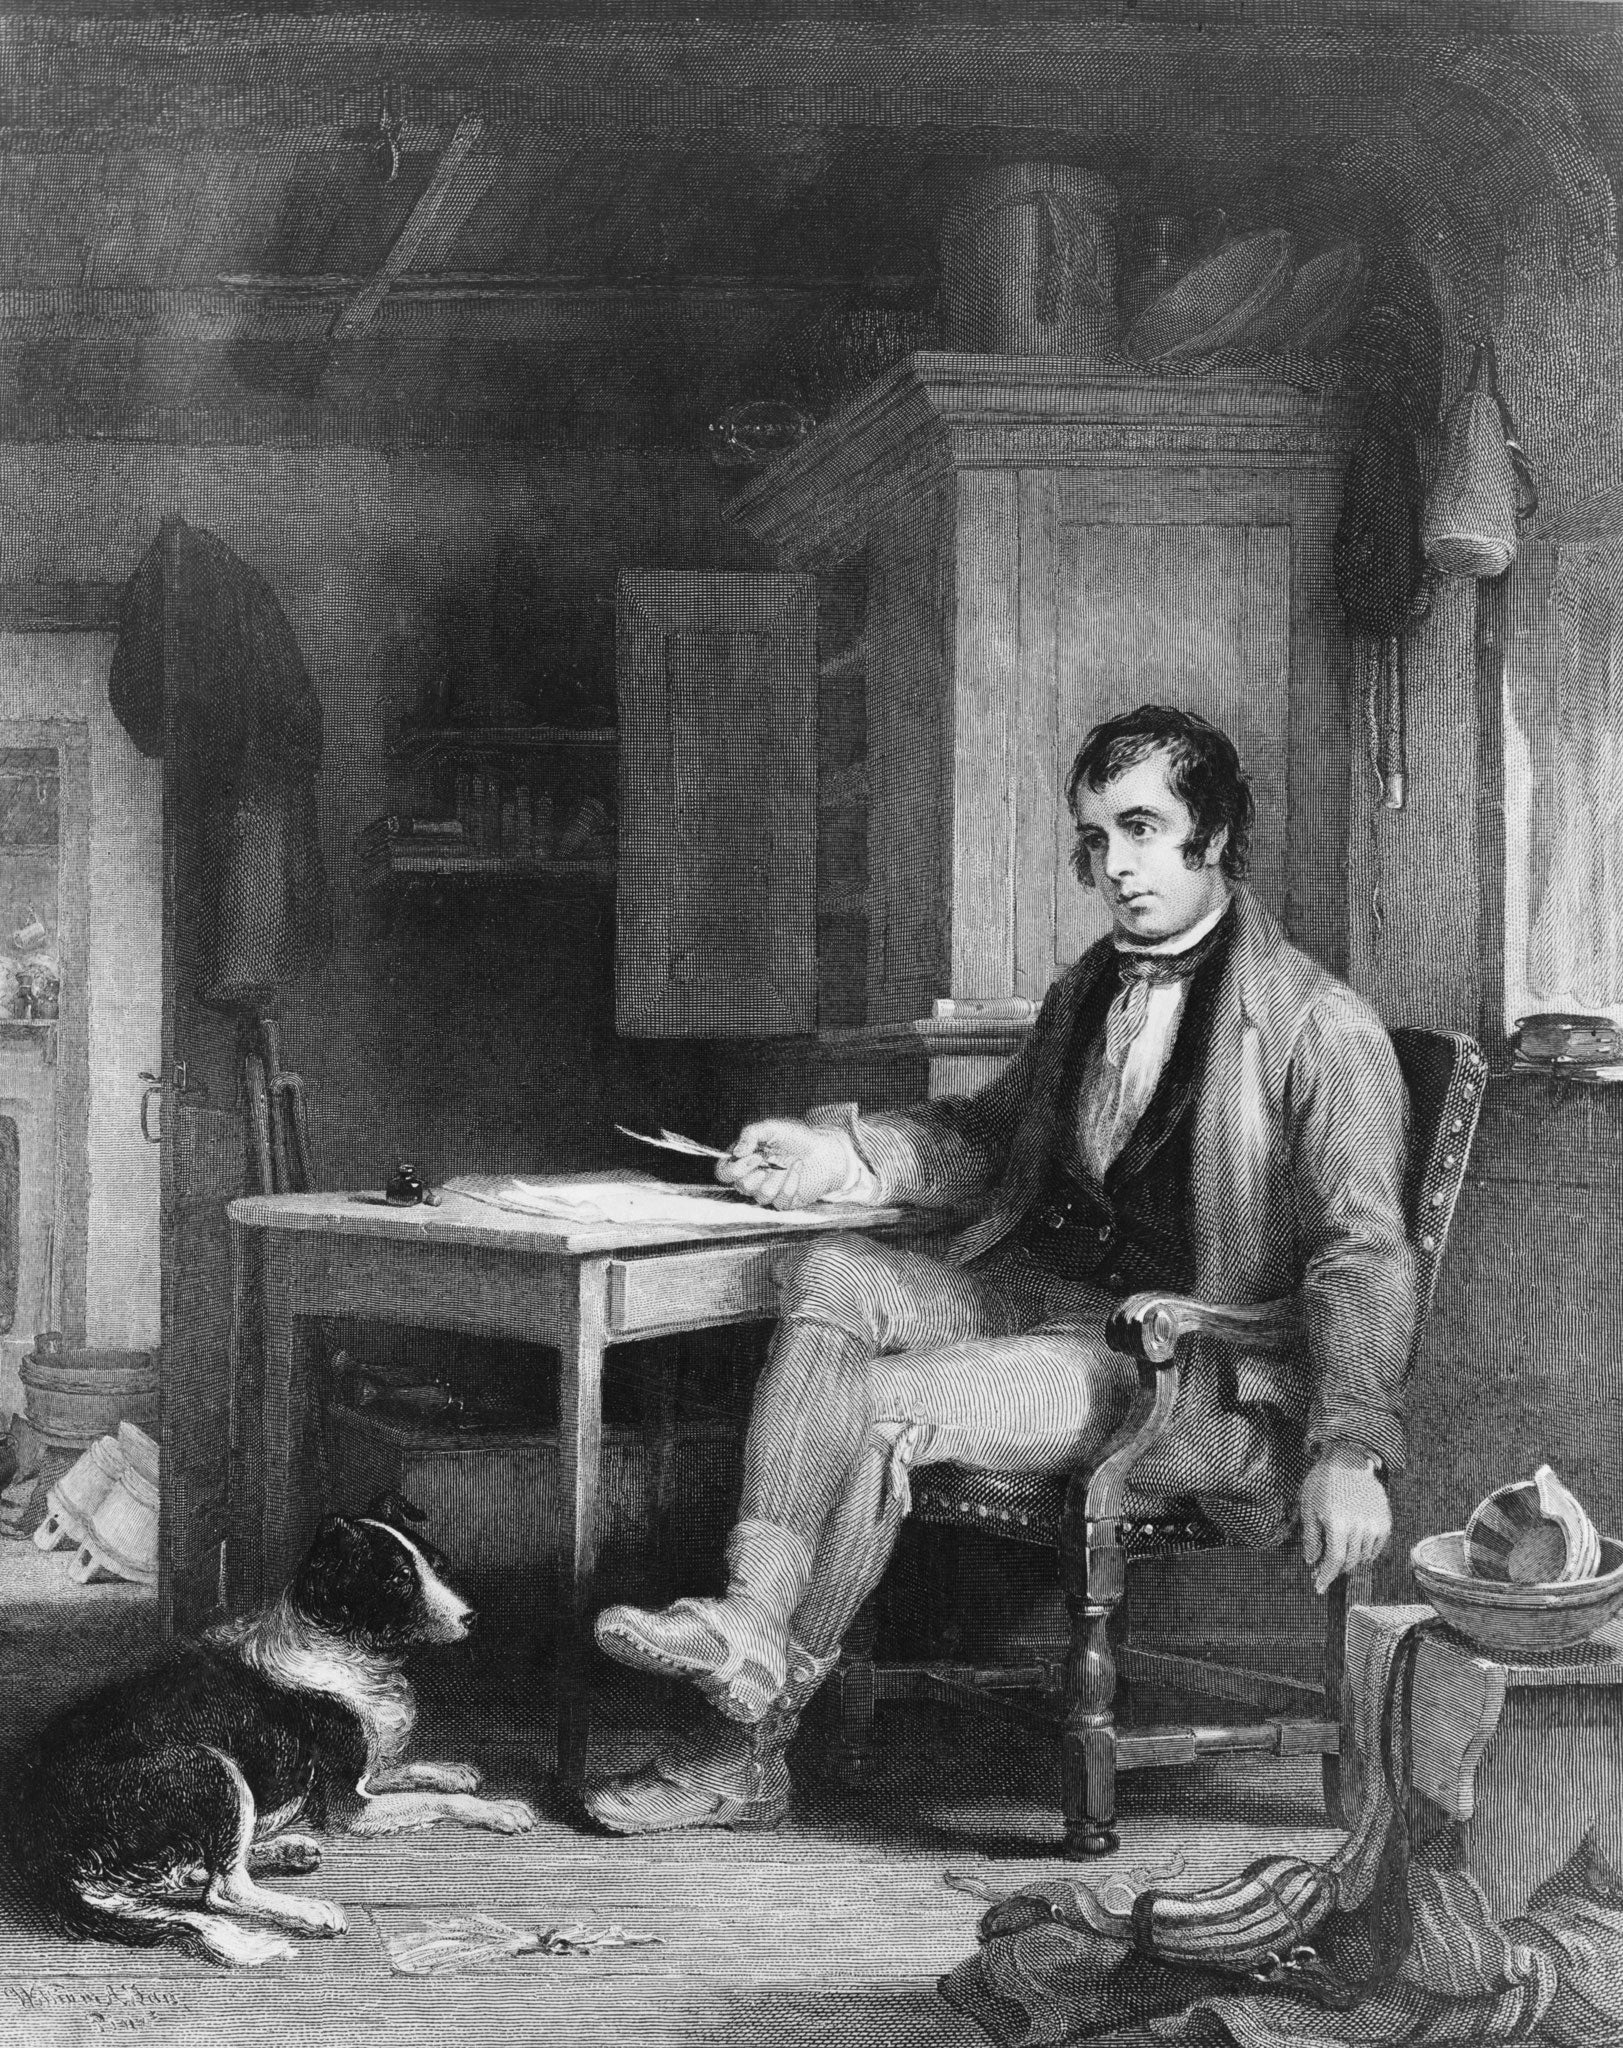 The pleasures of dialect: Robert Burns in his cottage composing 'The Cotter's Saturday Night'